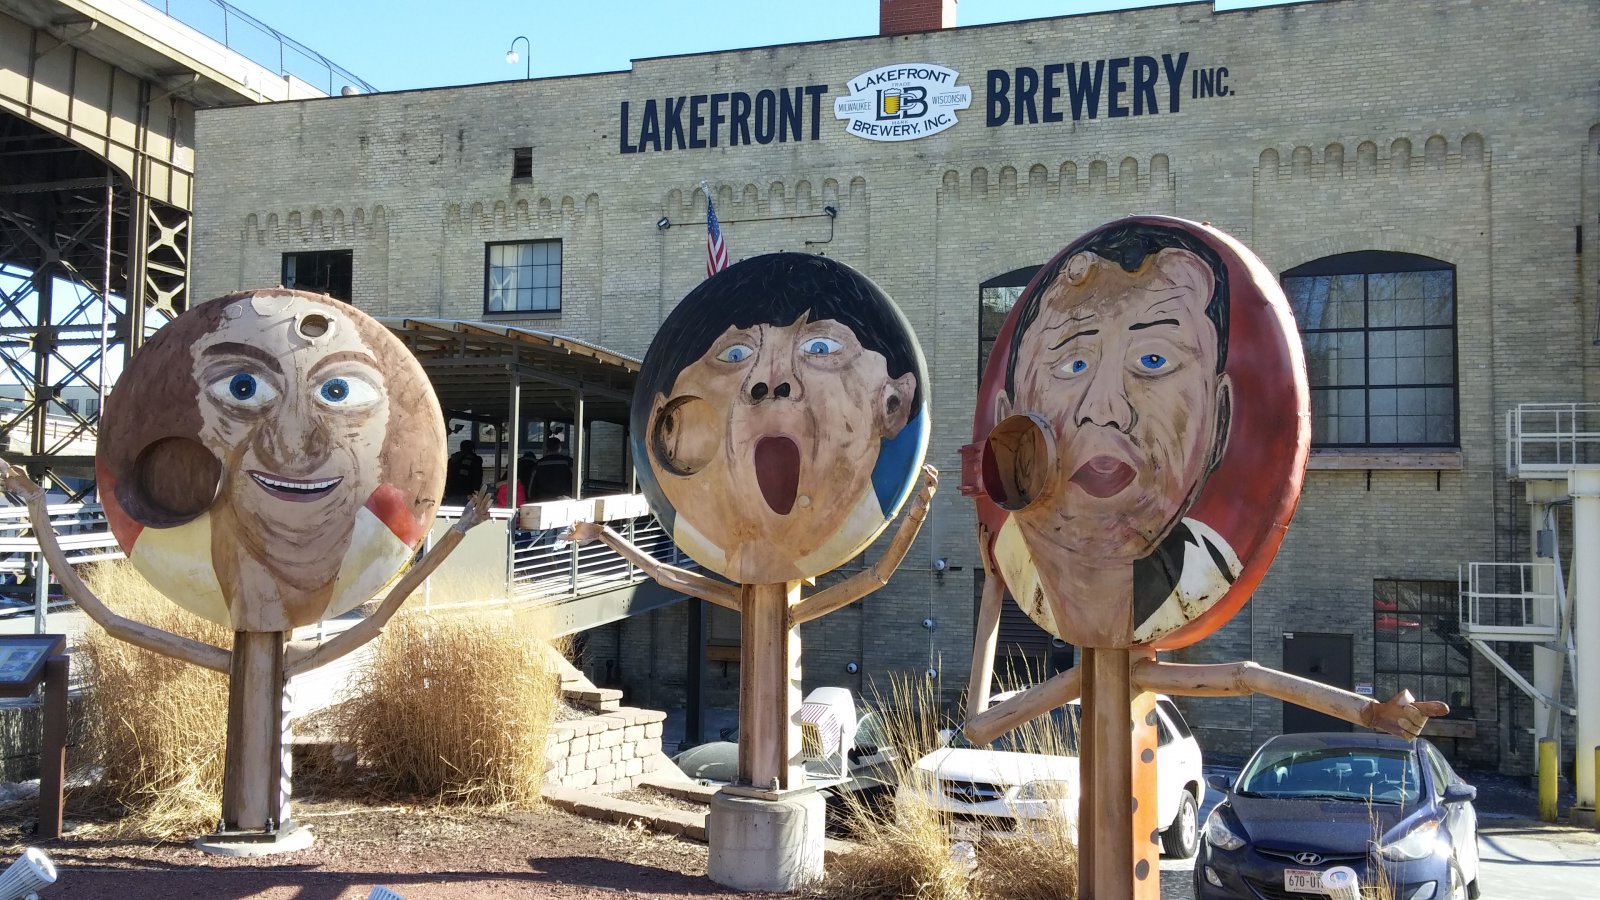 Lakefront Brewery. Photo taken February 9th, 2019 by Carl Baehr.